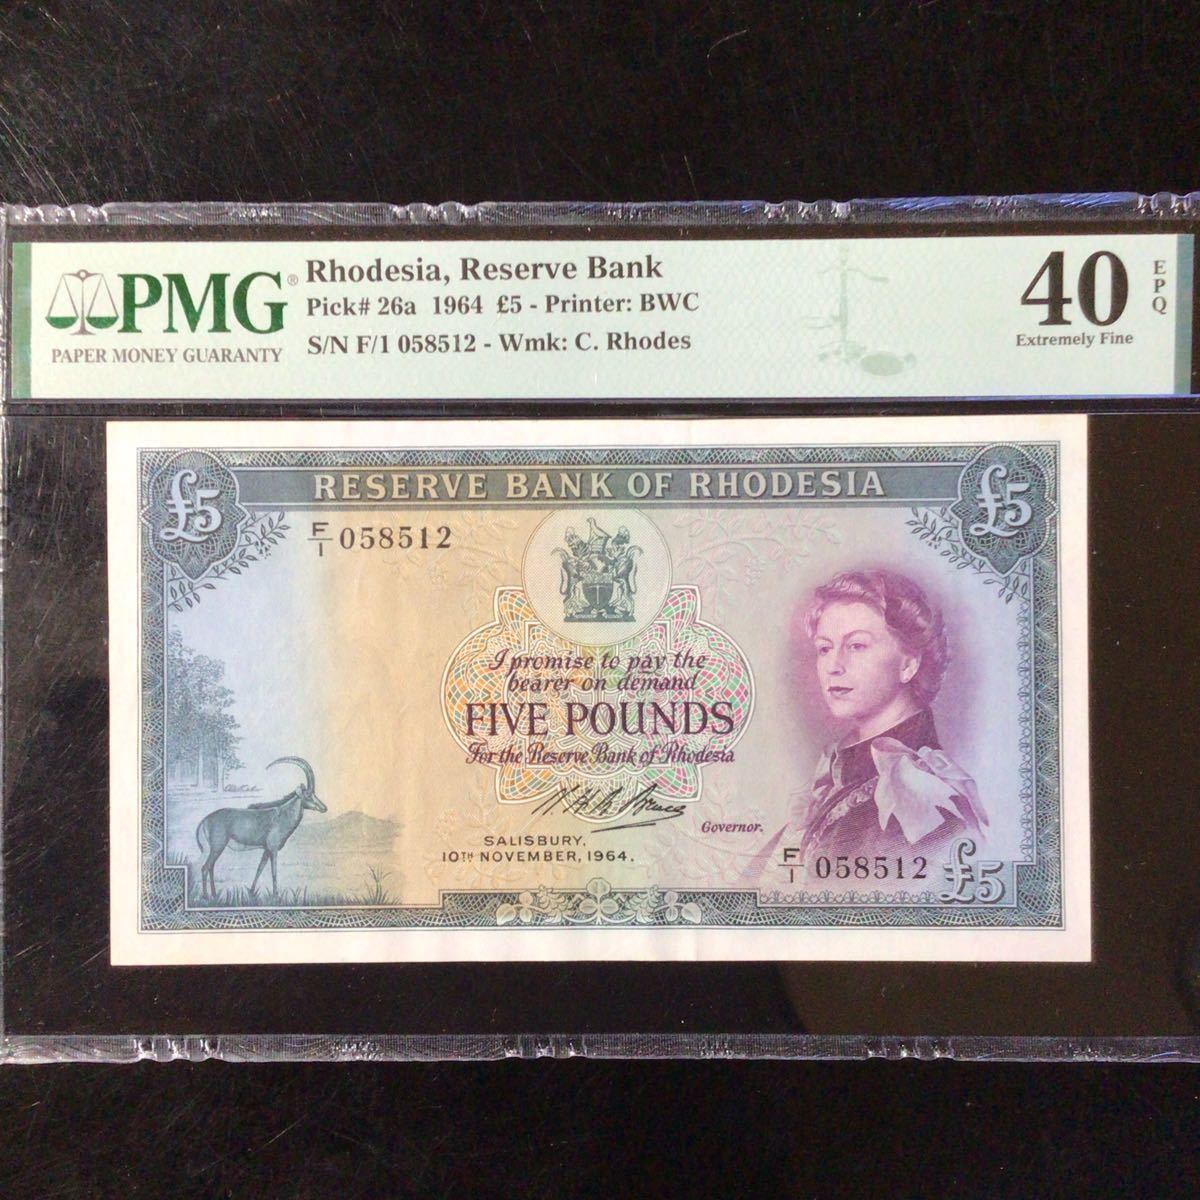 World Banknote Grading RHODESIA《Reserve Bank》5 Pounds【1964】『PMG Grading Extremely Fine 40 EPQ』